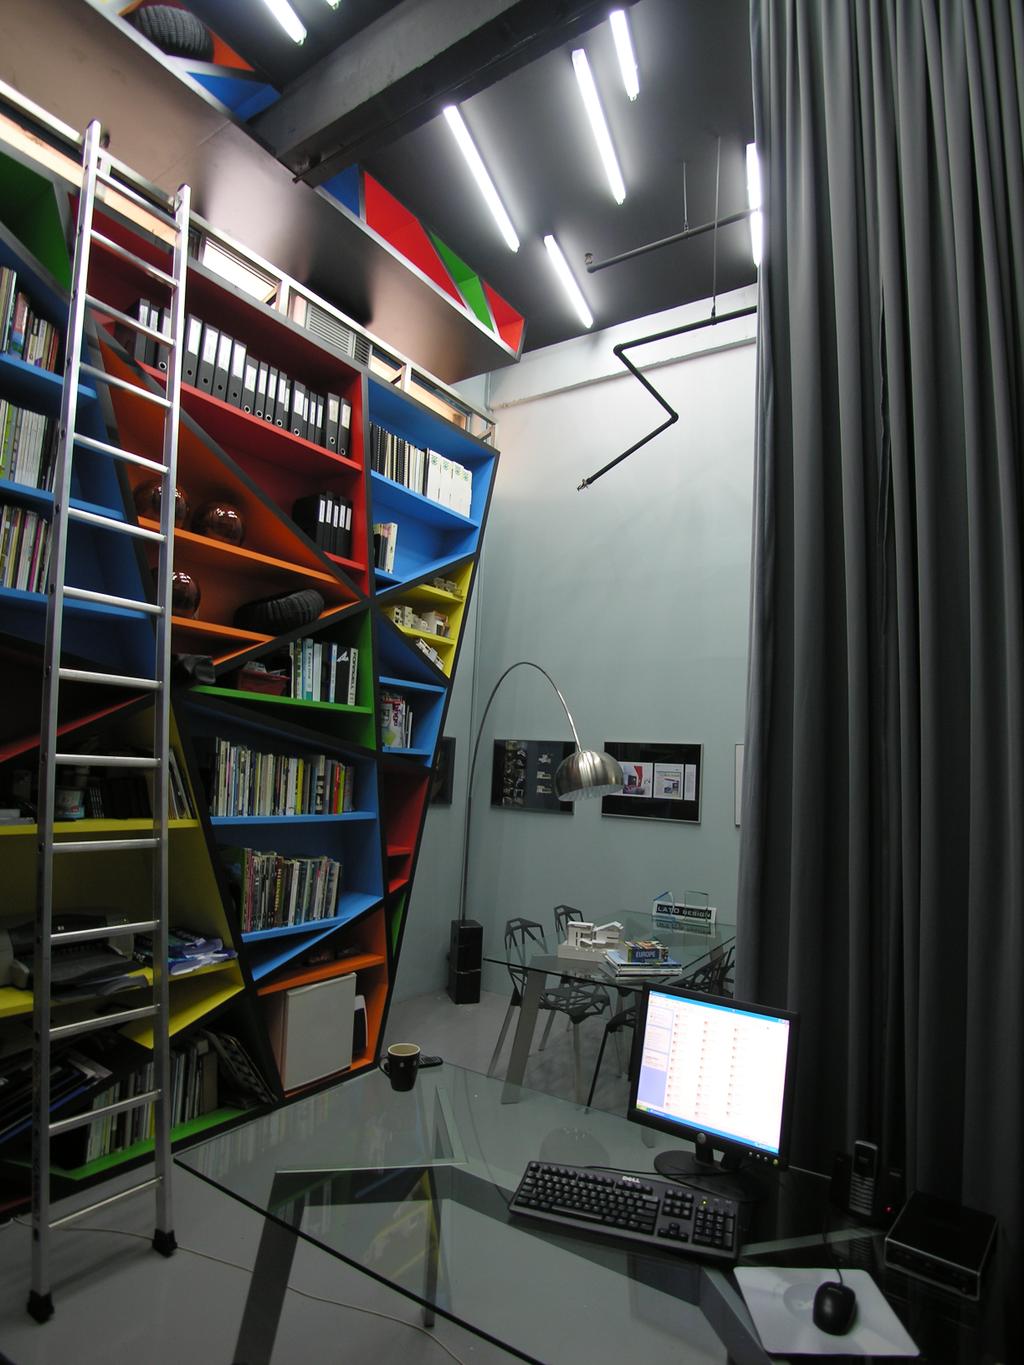 DATAscapes @ LATO Dsign Office, Commercial, Architect, Lim Ai Tiong (LATO) Architects, Eclectic, Bookcase, Furniture, Indoors, Interior Design, Library, Room, Curtain, Home Decor